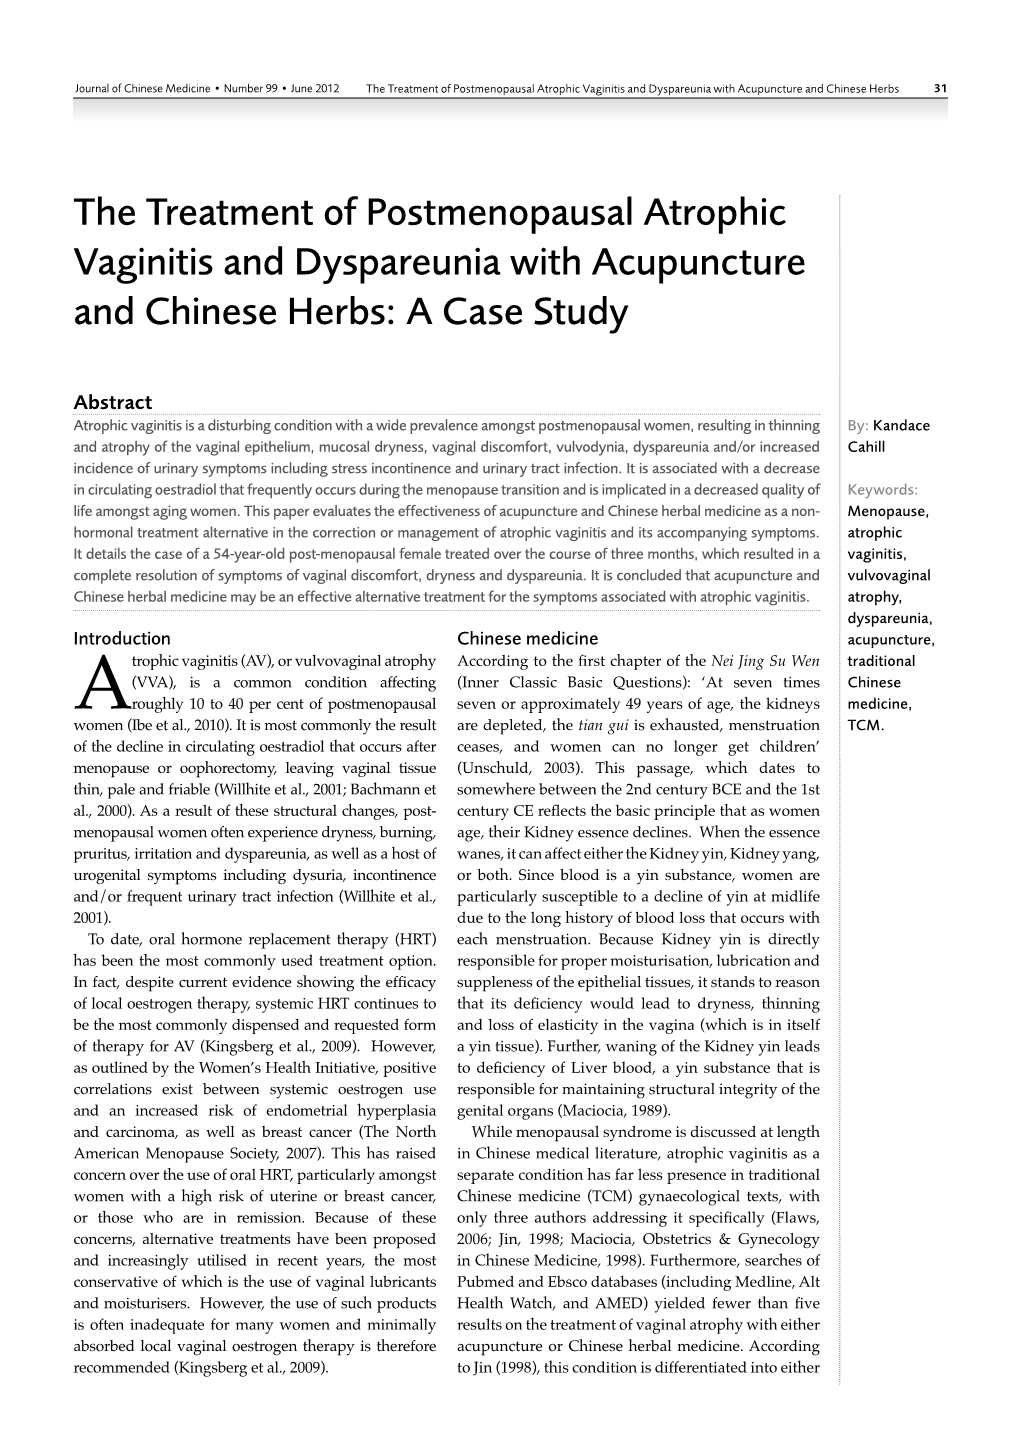 The Treatment of Postmenopausal Atrophic Vaginitis and Dyspareunia with Acupuncture and Chinese Herbs 31